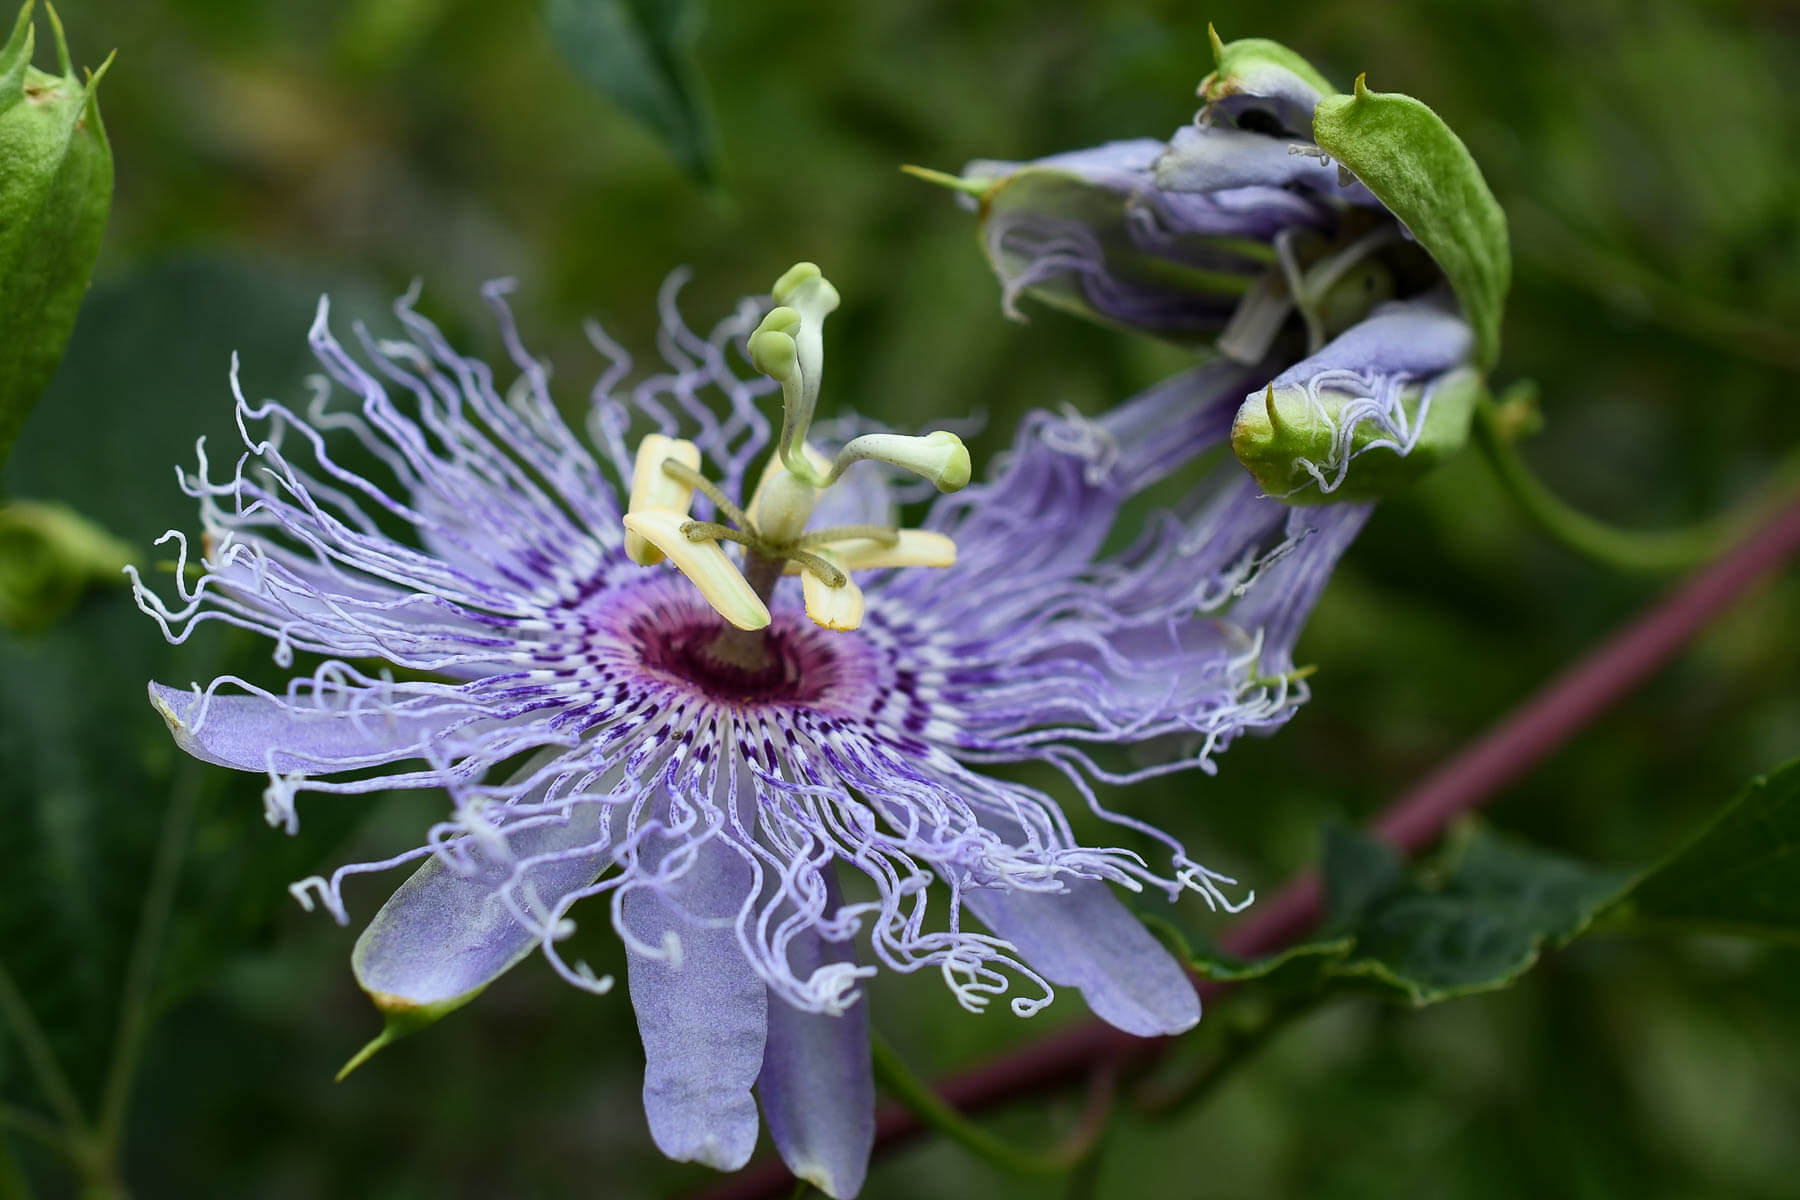 A passionflower.